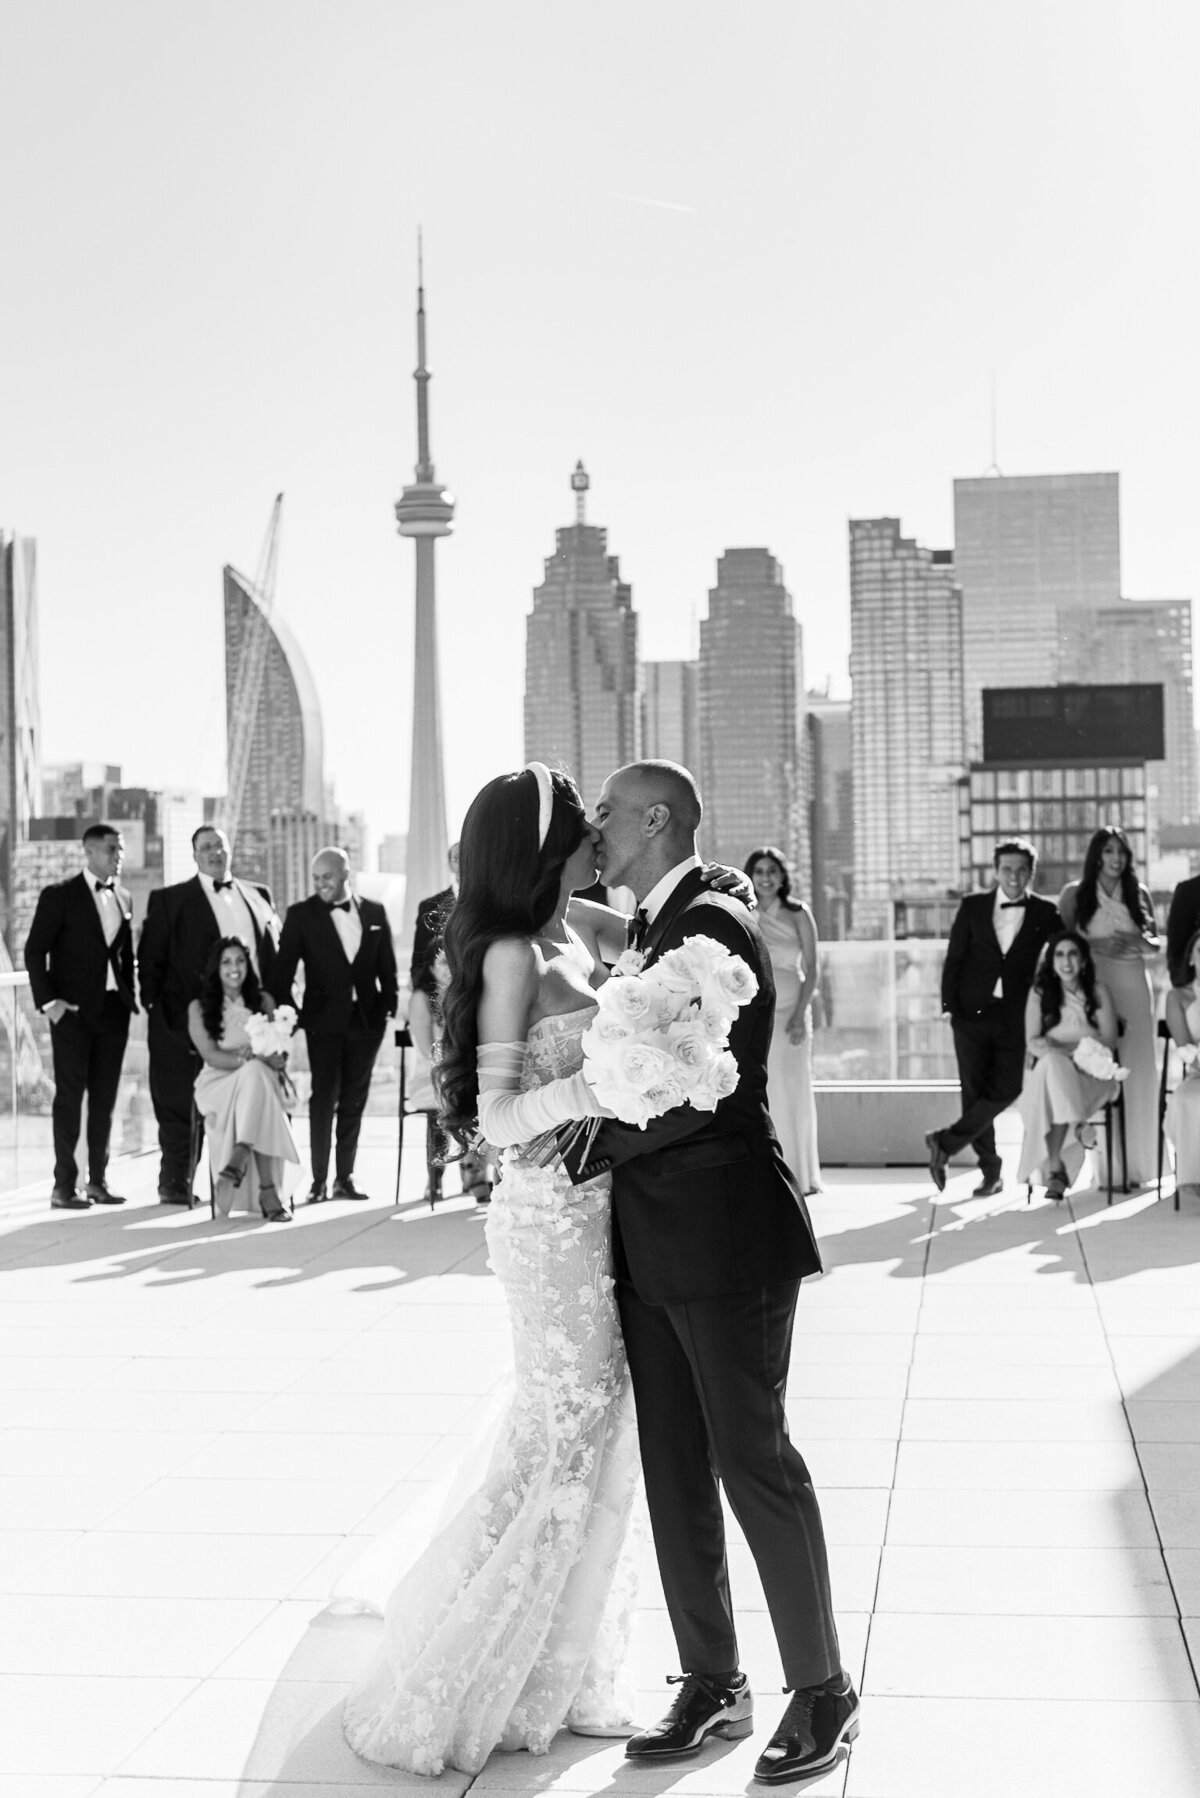 Photograph of bride and groom with Toronto Skyline behind